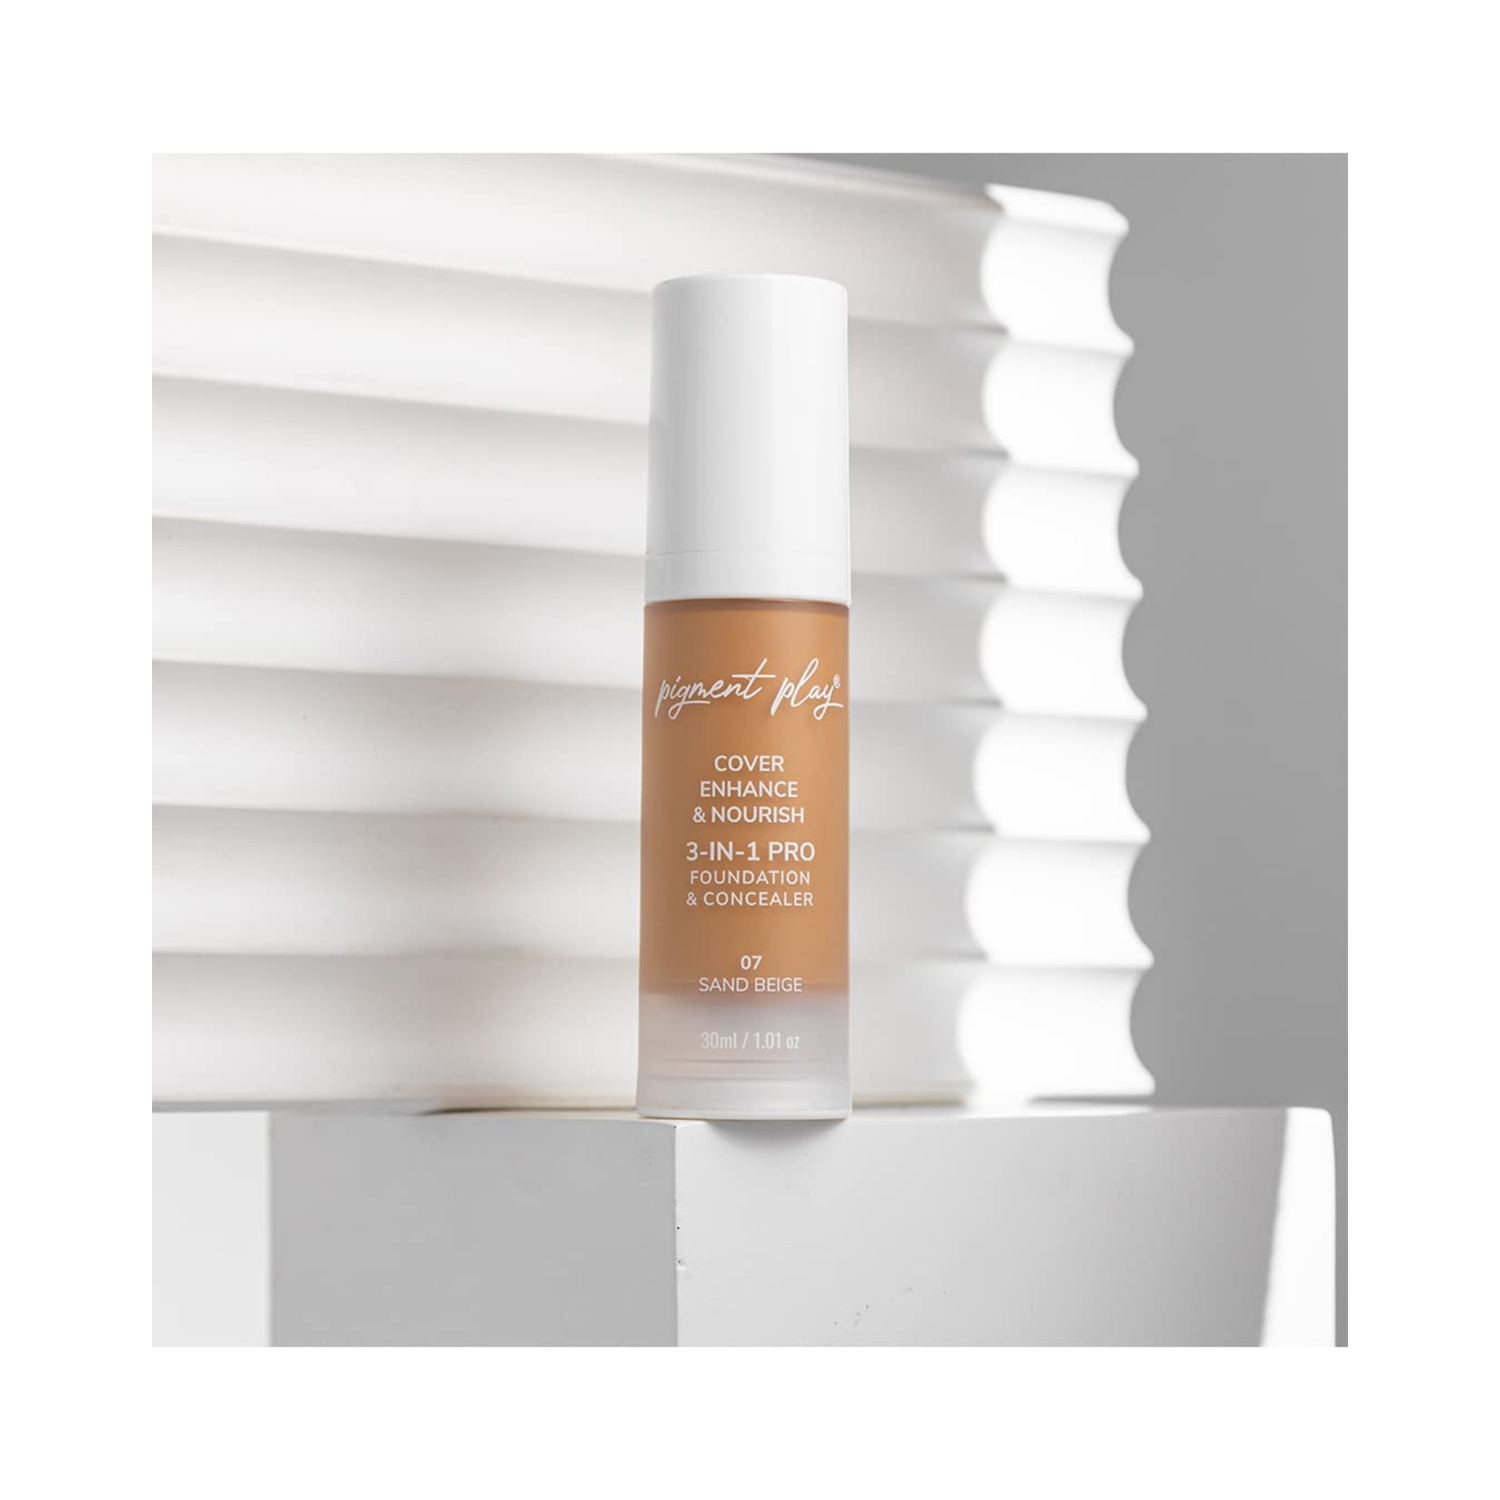 Pigment Play | Pigment Play 3-in-1 Cover + Enhance + Nourish Foundation & Concealer - 07 Sand Beige (30ml)